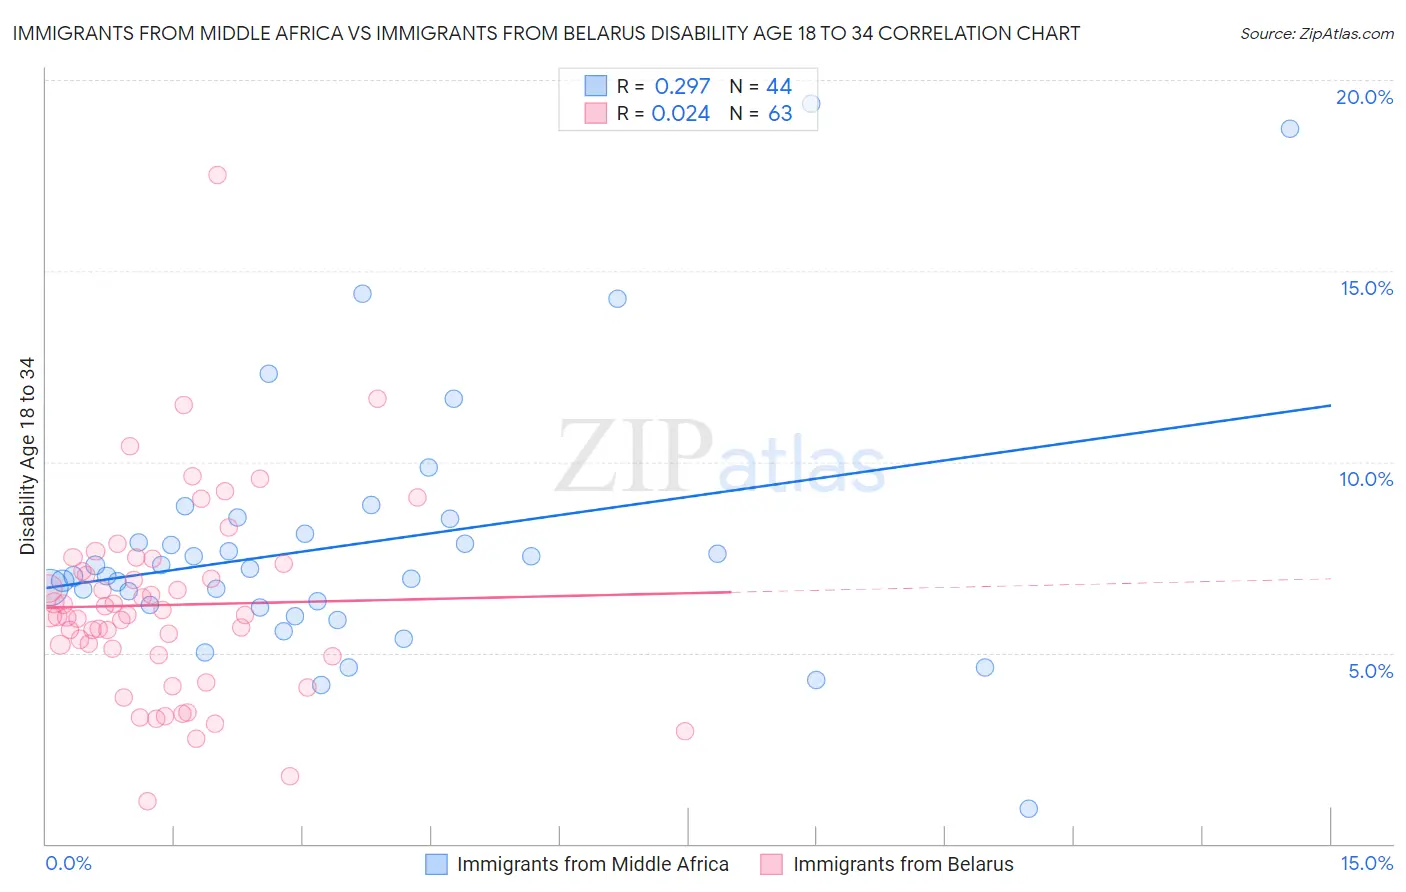 Immigrants from Middle Africa vs Immigrants from Belarus Disability Age 18 to 34